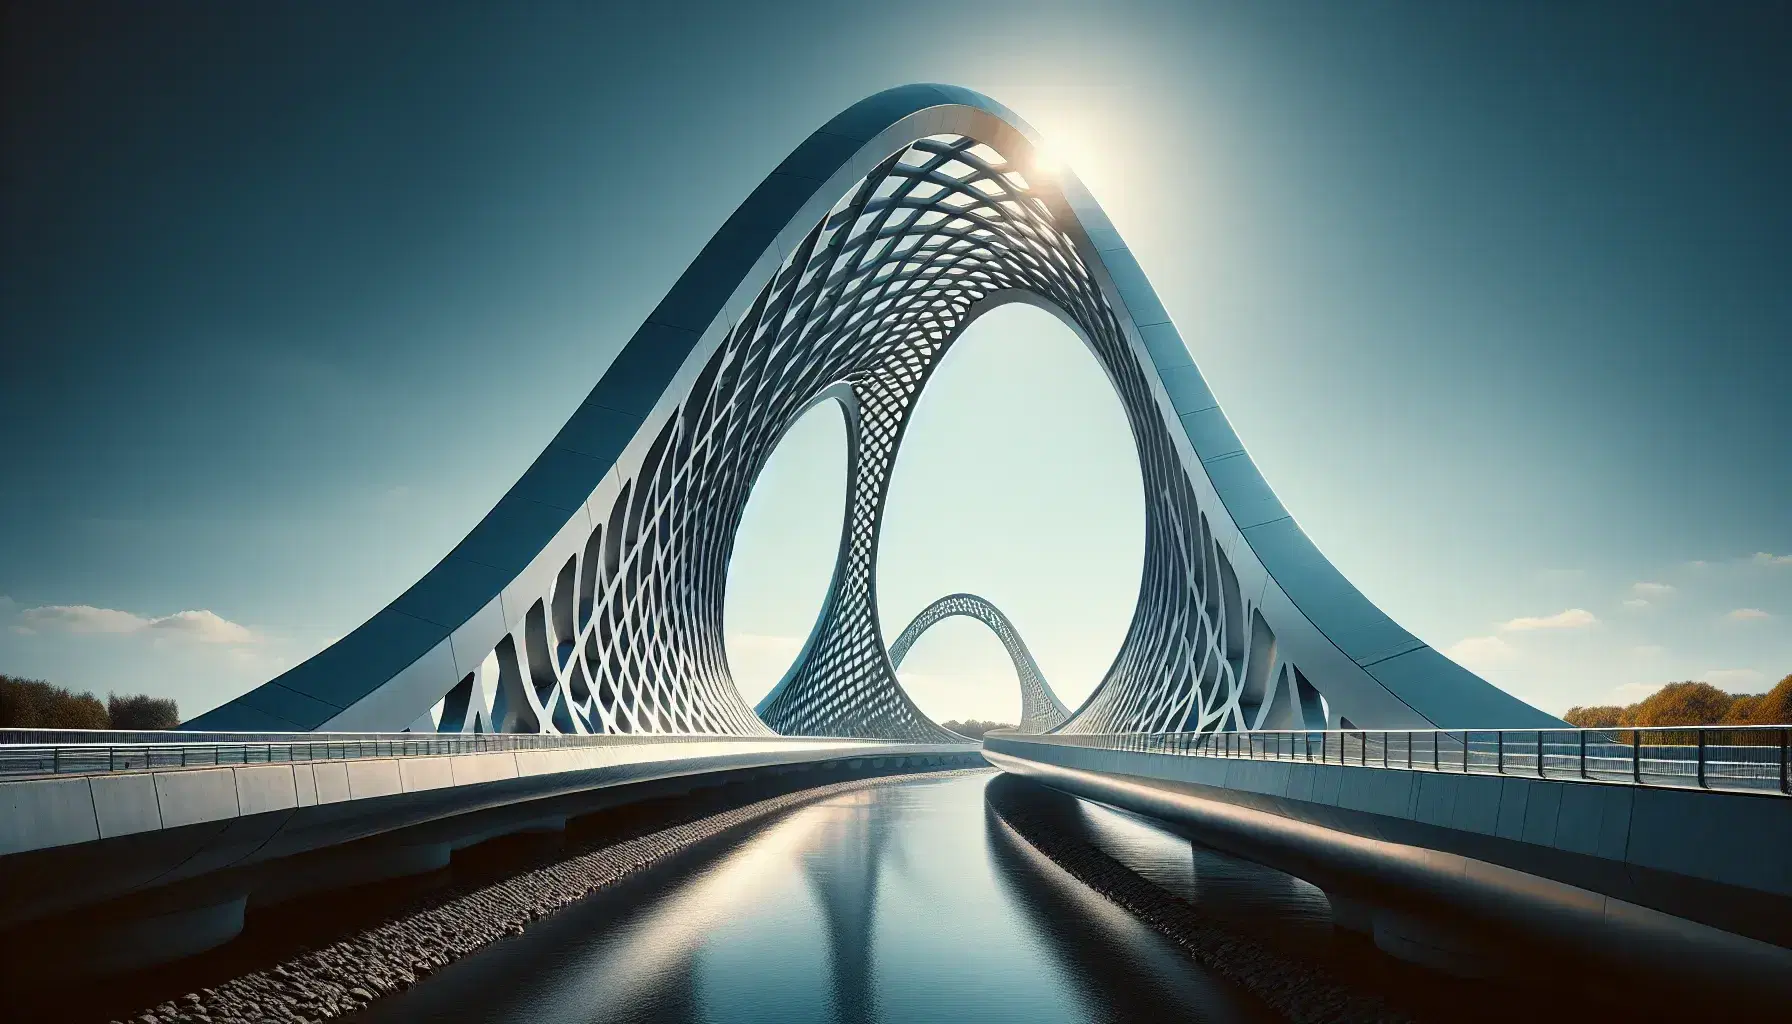 Parabolic metallic bridge with reflective surface arching over water against a clear blue sky, highlighted by sunlight at its vertex.